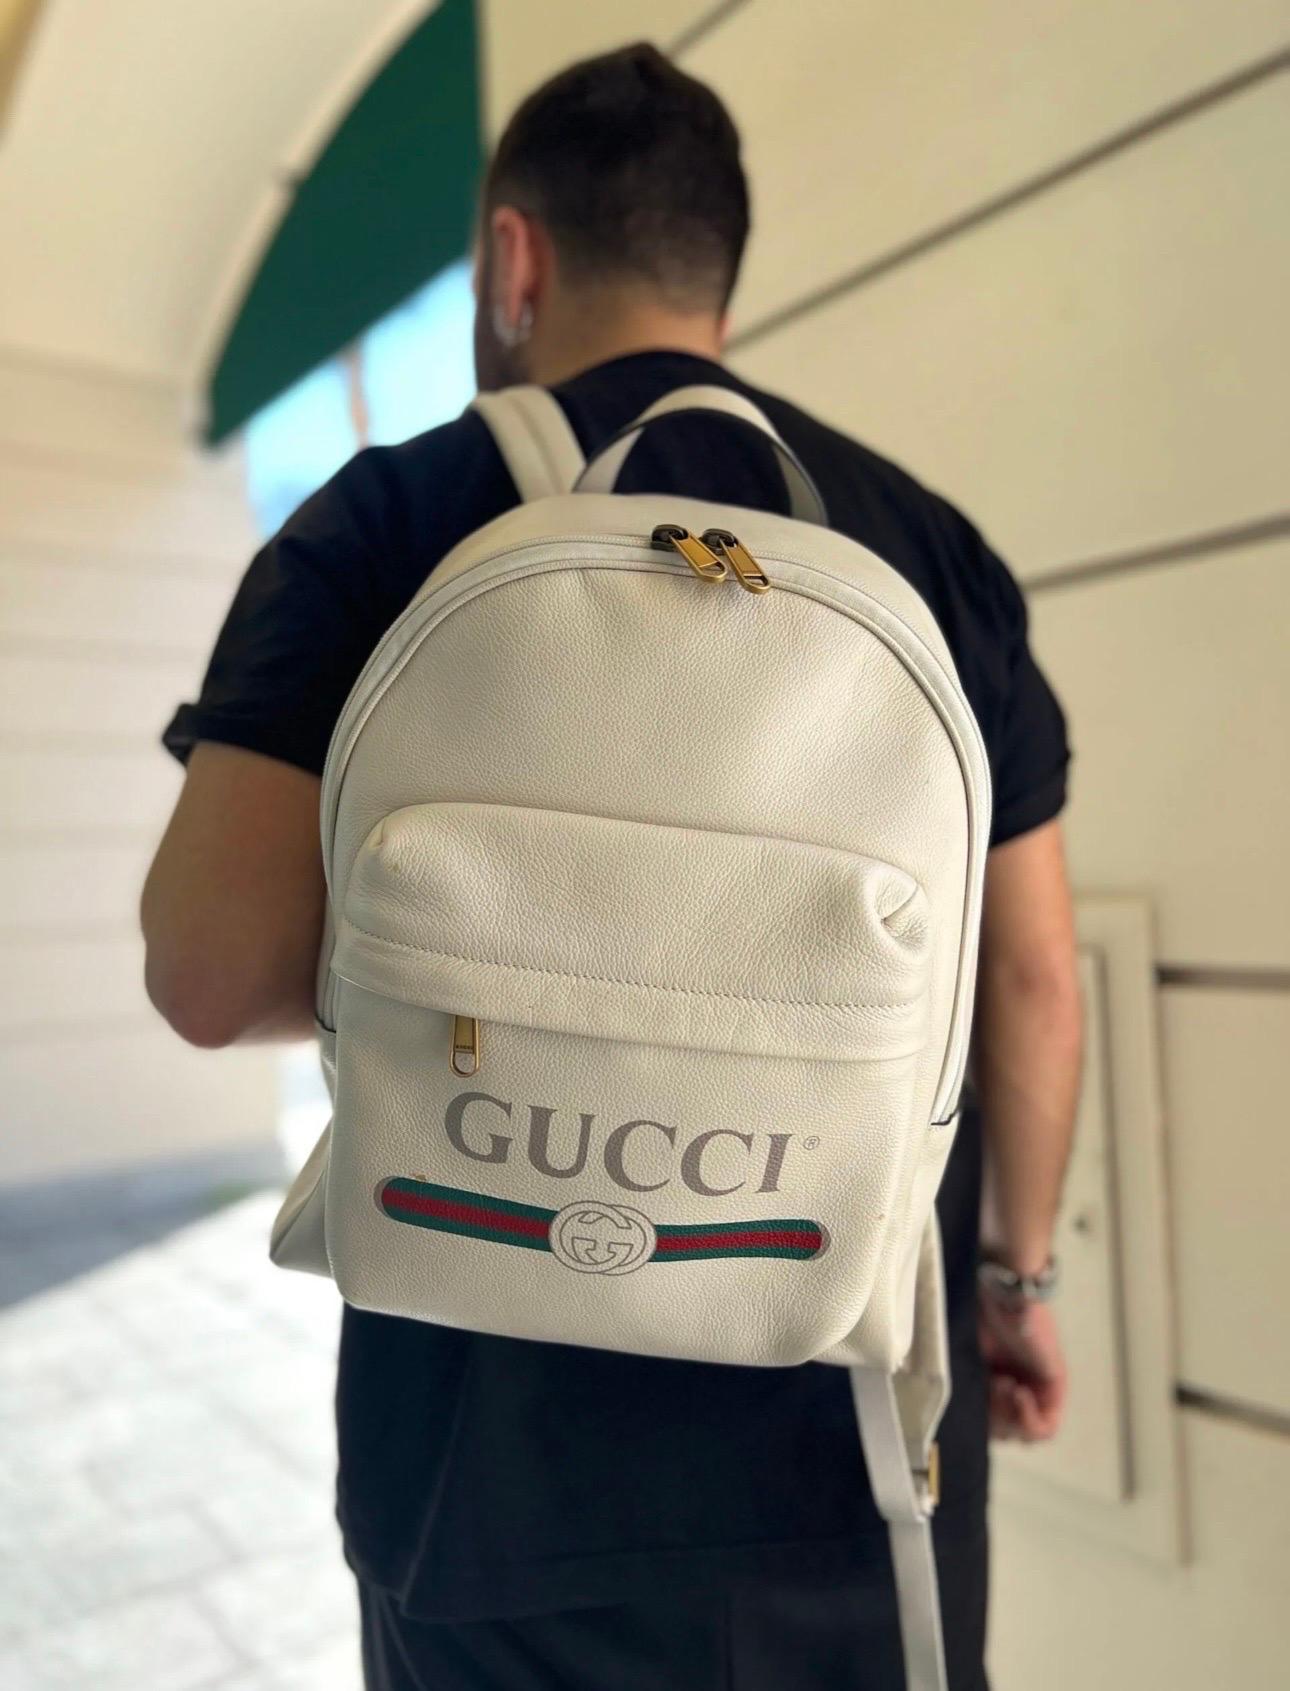 Gucci backpack, made of white leather and golden hardware.
The product is equipped with a zip closure, internally lined with white canvas, very roomy.
There are also two adjustable leather handles and two zip pockets, one external and the other